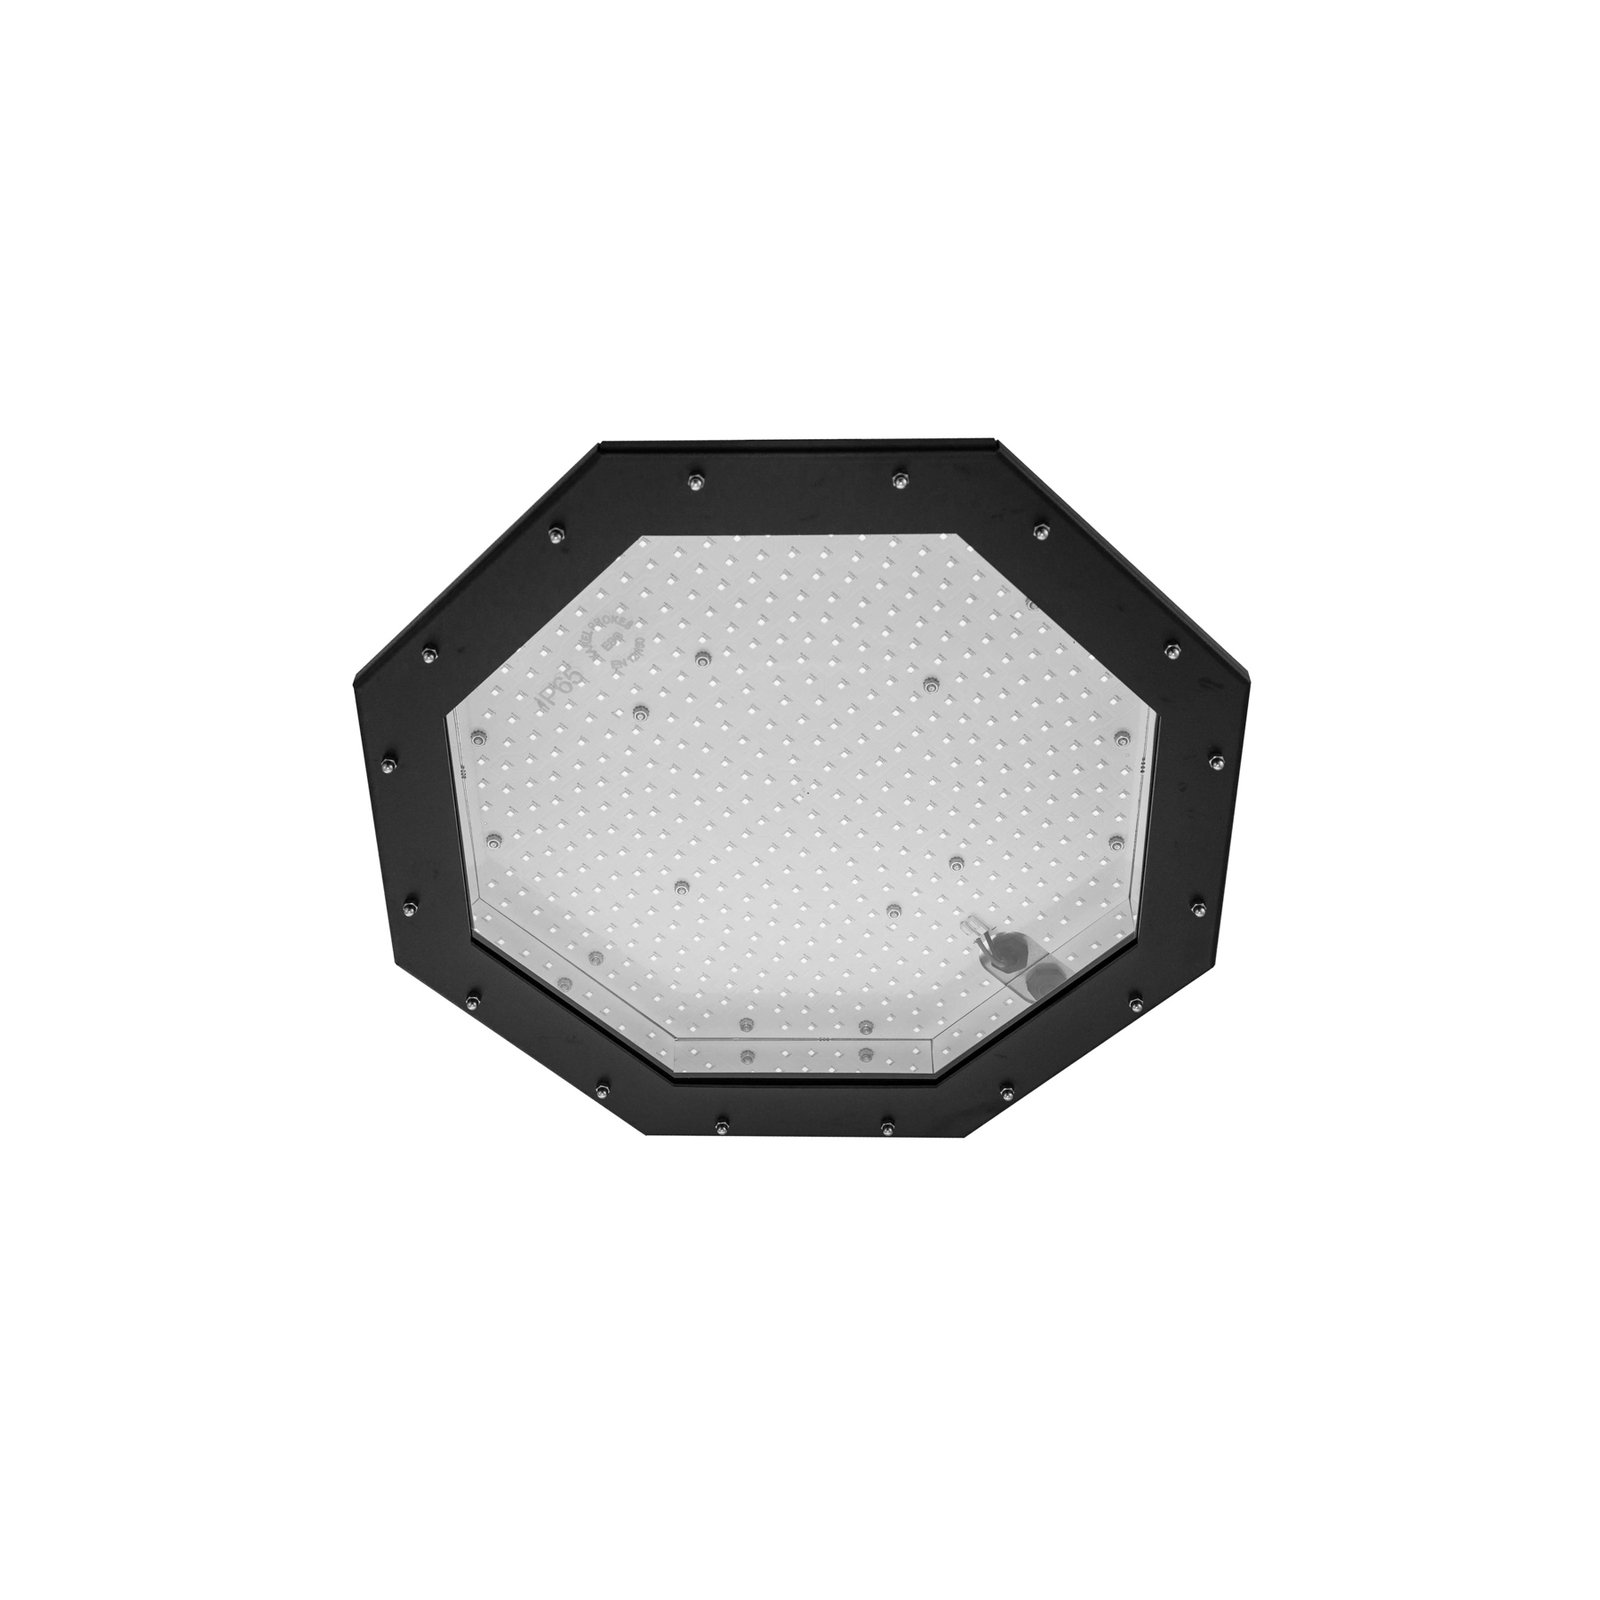 Proiettore a LED HBS on/off 840, 82W, vetro